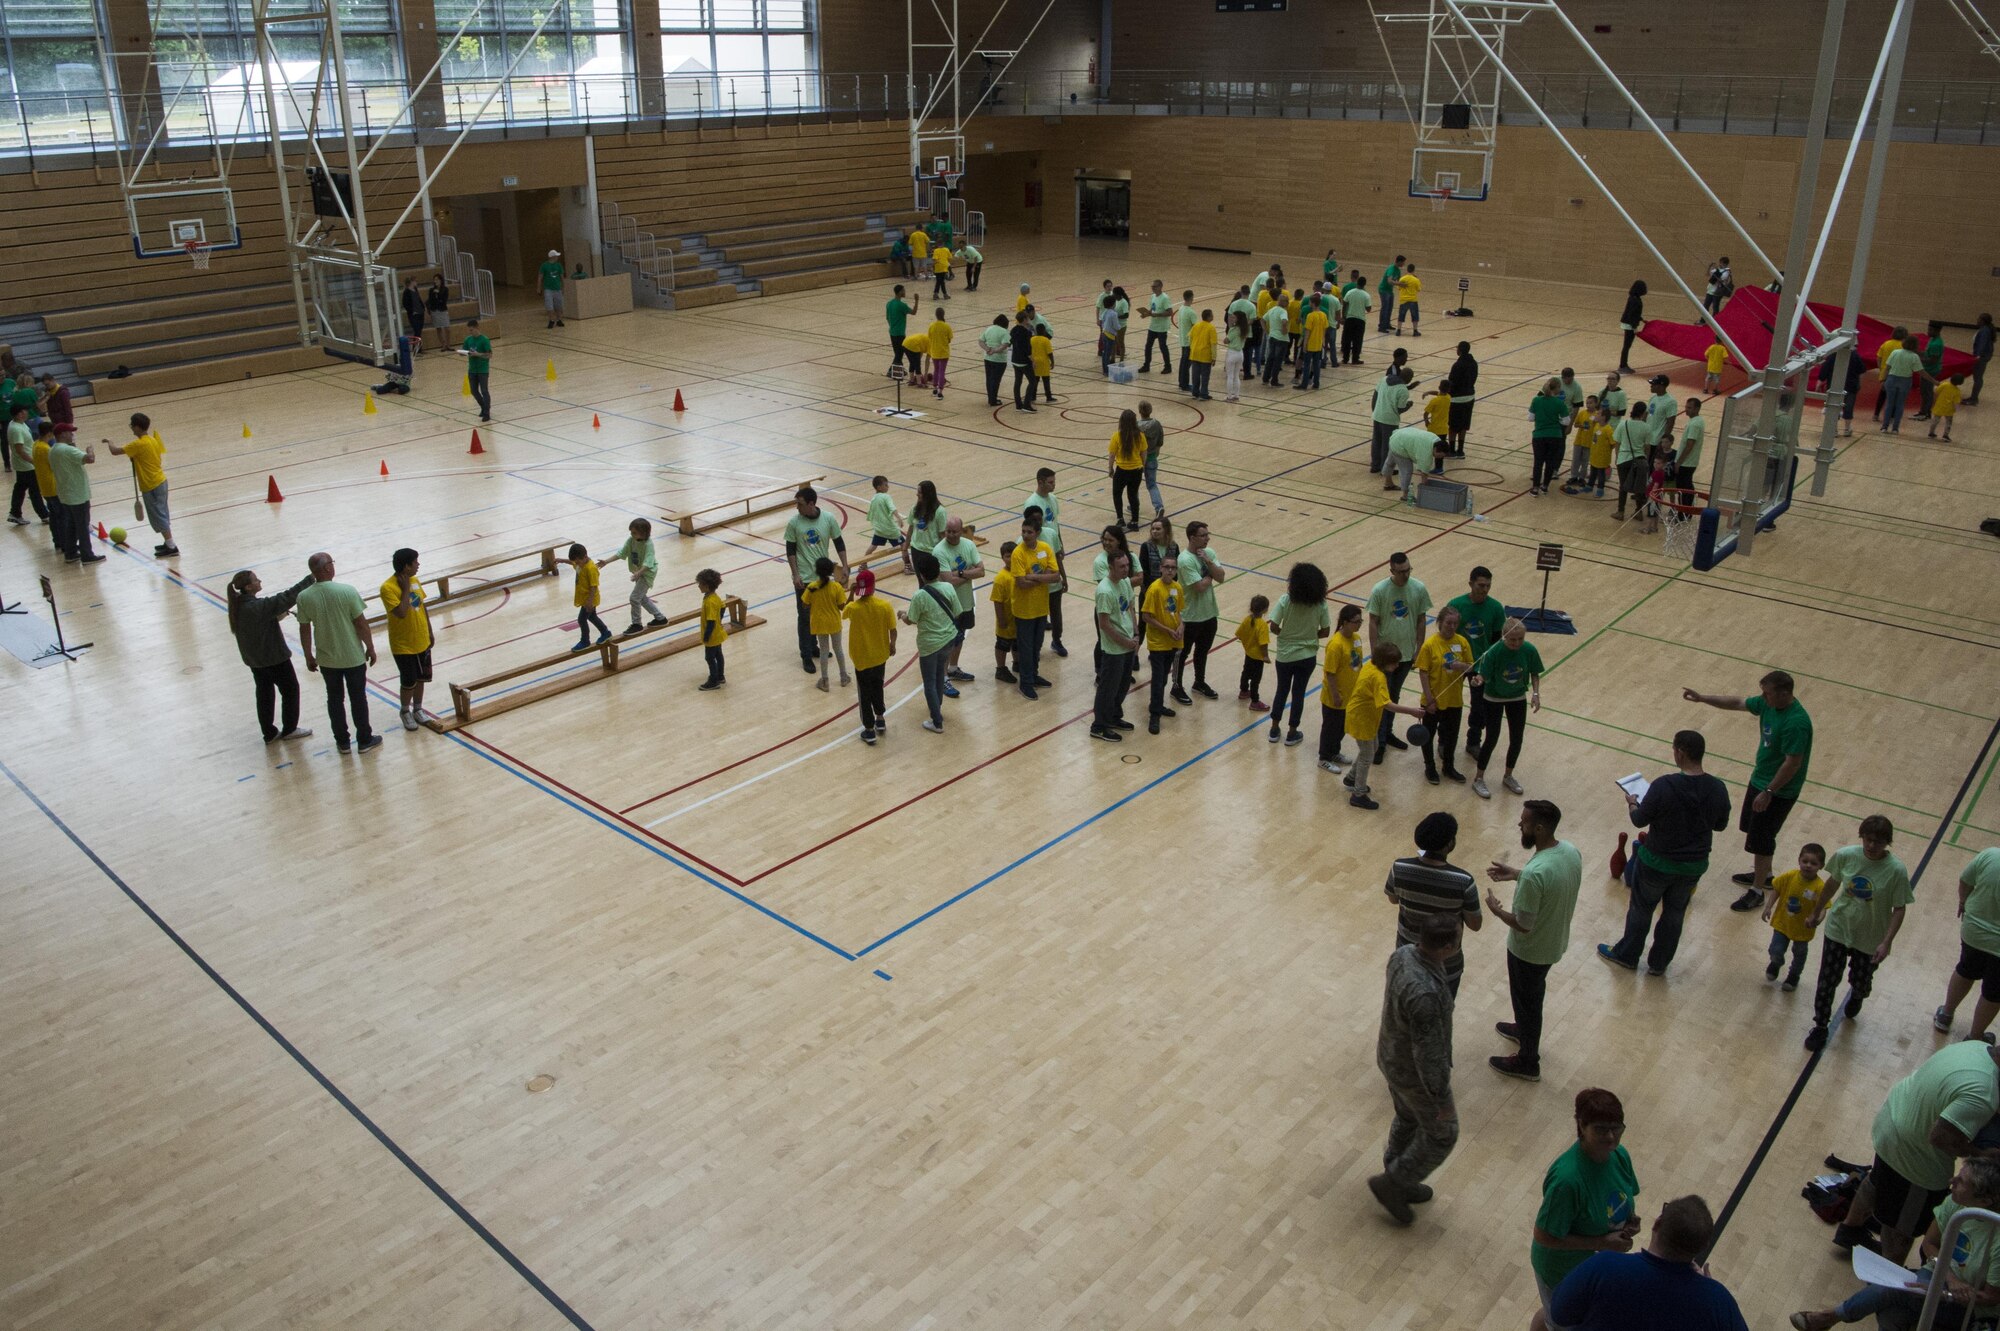 Students and volunteers participate in activities during St. Martins Special Children's Day at Spangdahlem Air Base, Germany, June 28, 2017. The event marked the 25th year where students with special needs around the area were invited to participate in activities with volunteers.  (U.S. Air Force photo by Senior Airman Preston Cherry)